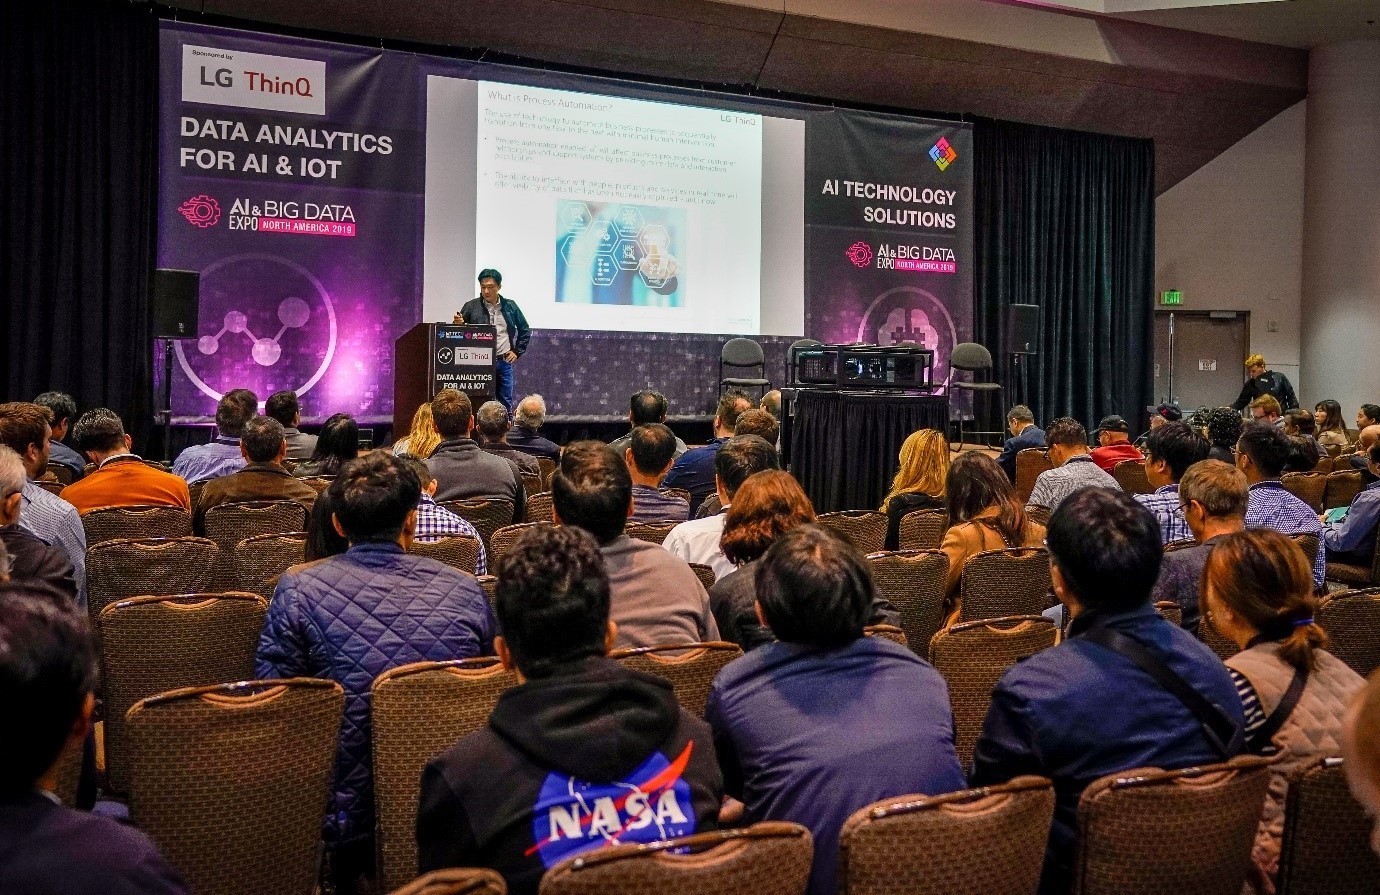 Samuel Chang, corporate vice president of the LG Silicon Valley Lab, discusses Process Automation from IoT Data in front of a large audience, with a large banner bearing the LG ThinQ logo behind him.